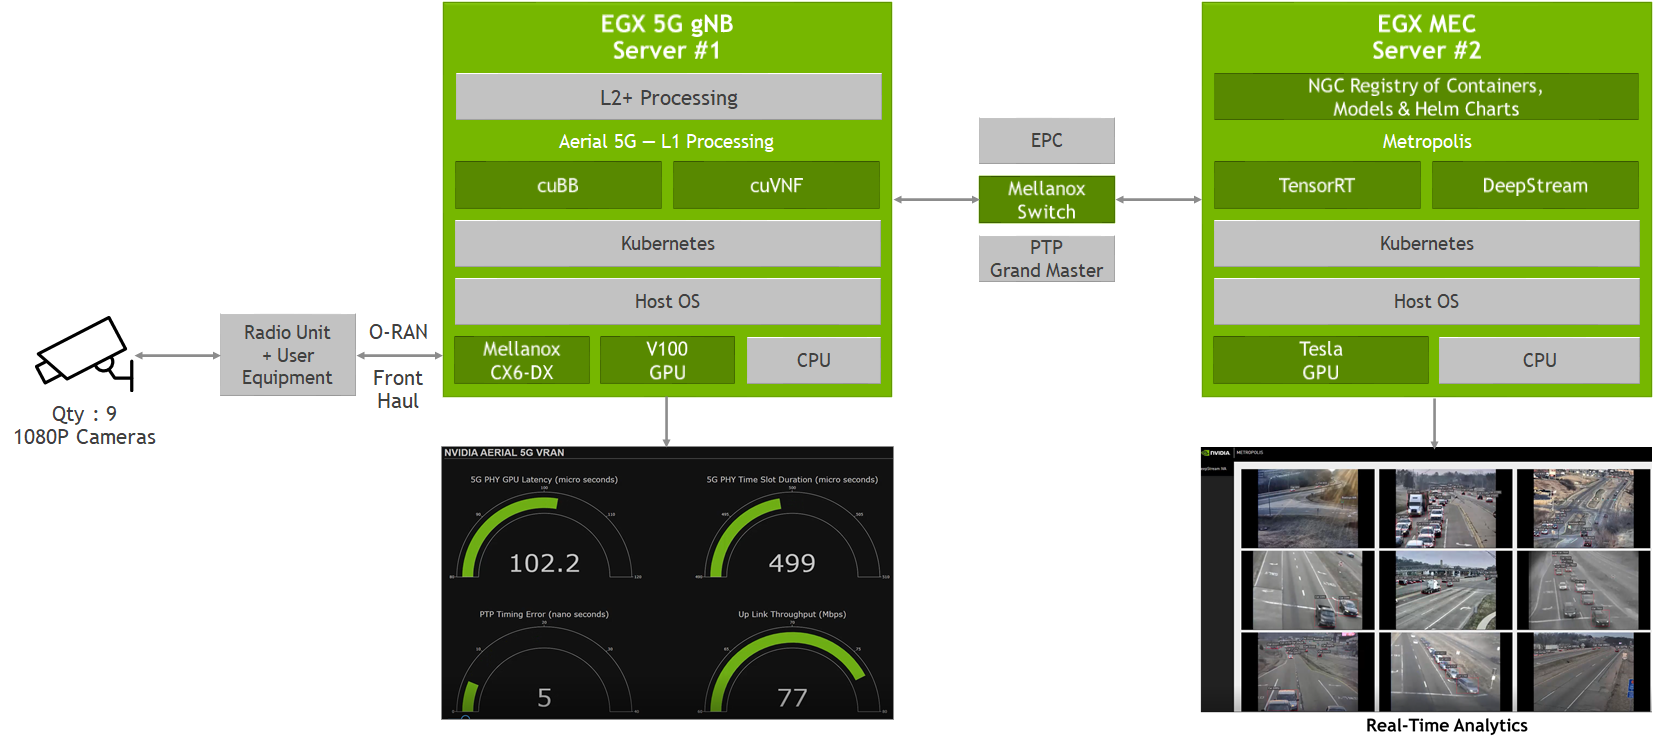 NVIDIA AX800 Delivers High-Performance 5G vRAN and AI Services on